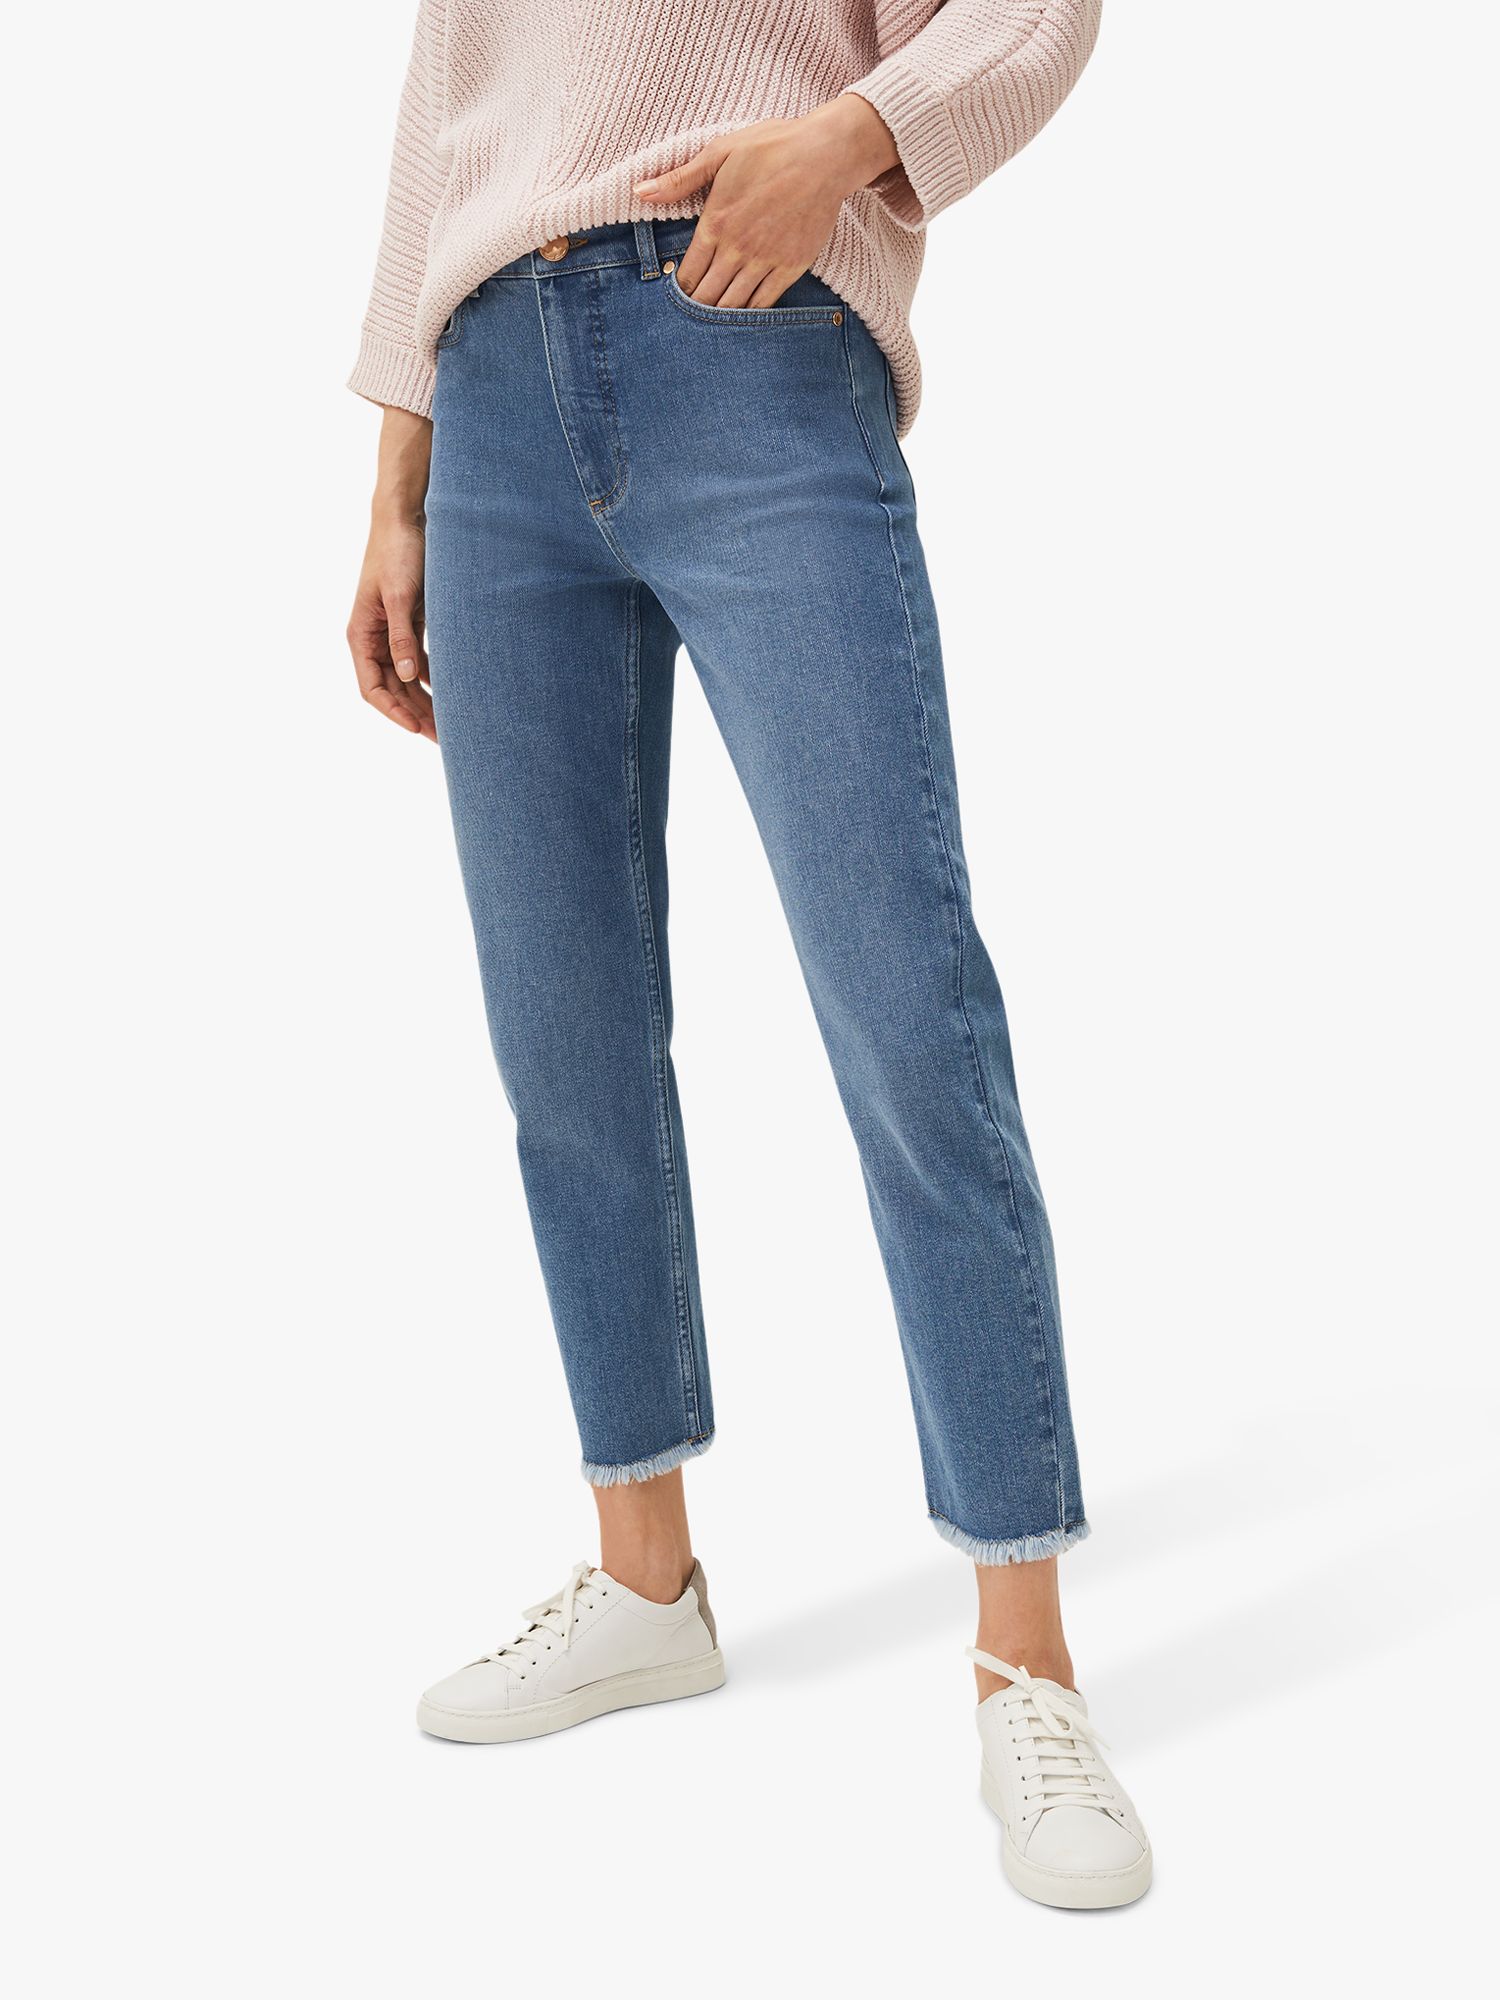 Phase Eight Petra Raw Hem Cropped Jeans, Blue, 26